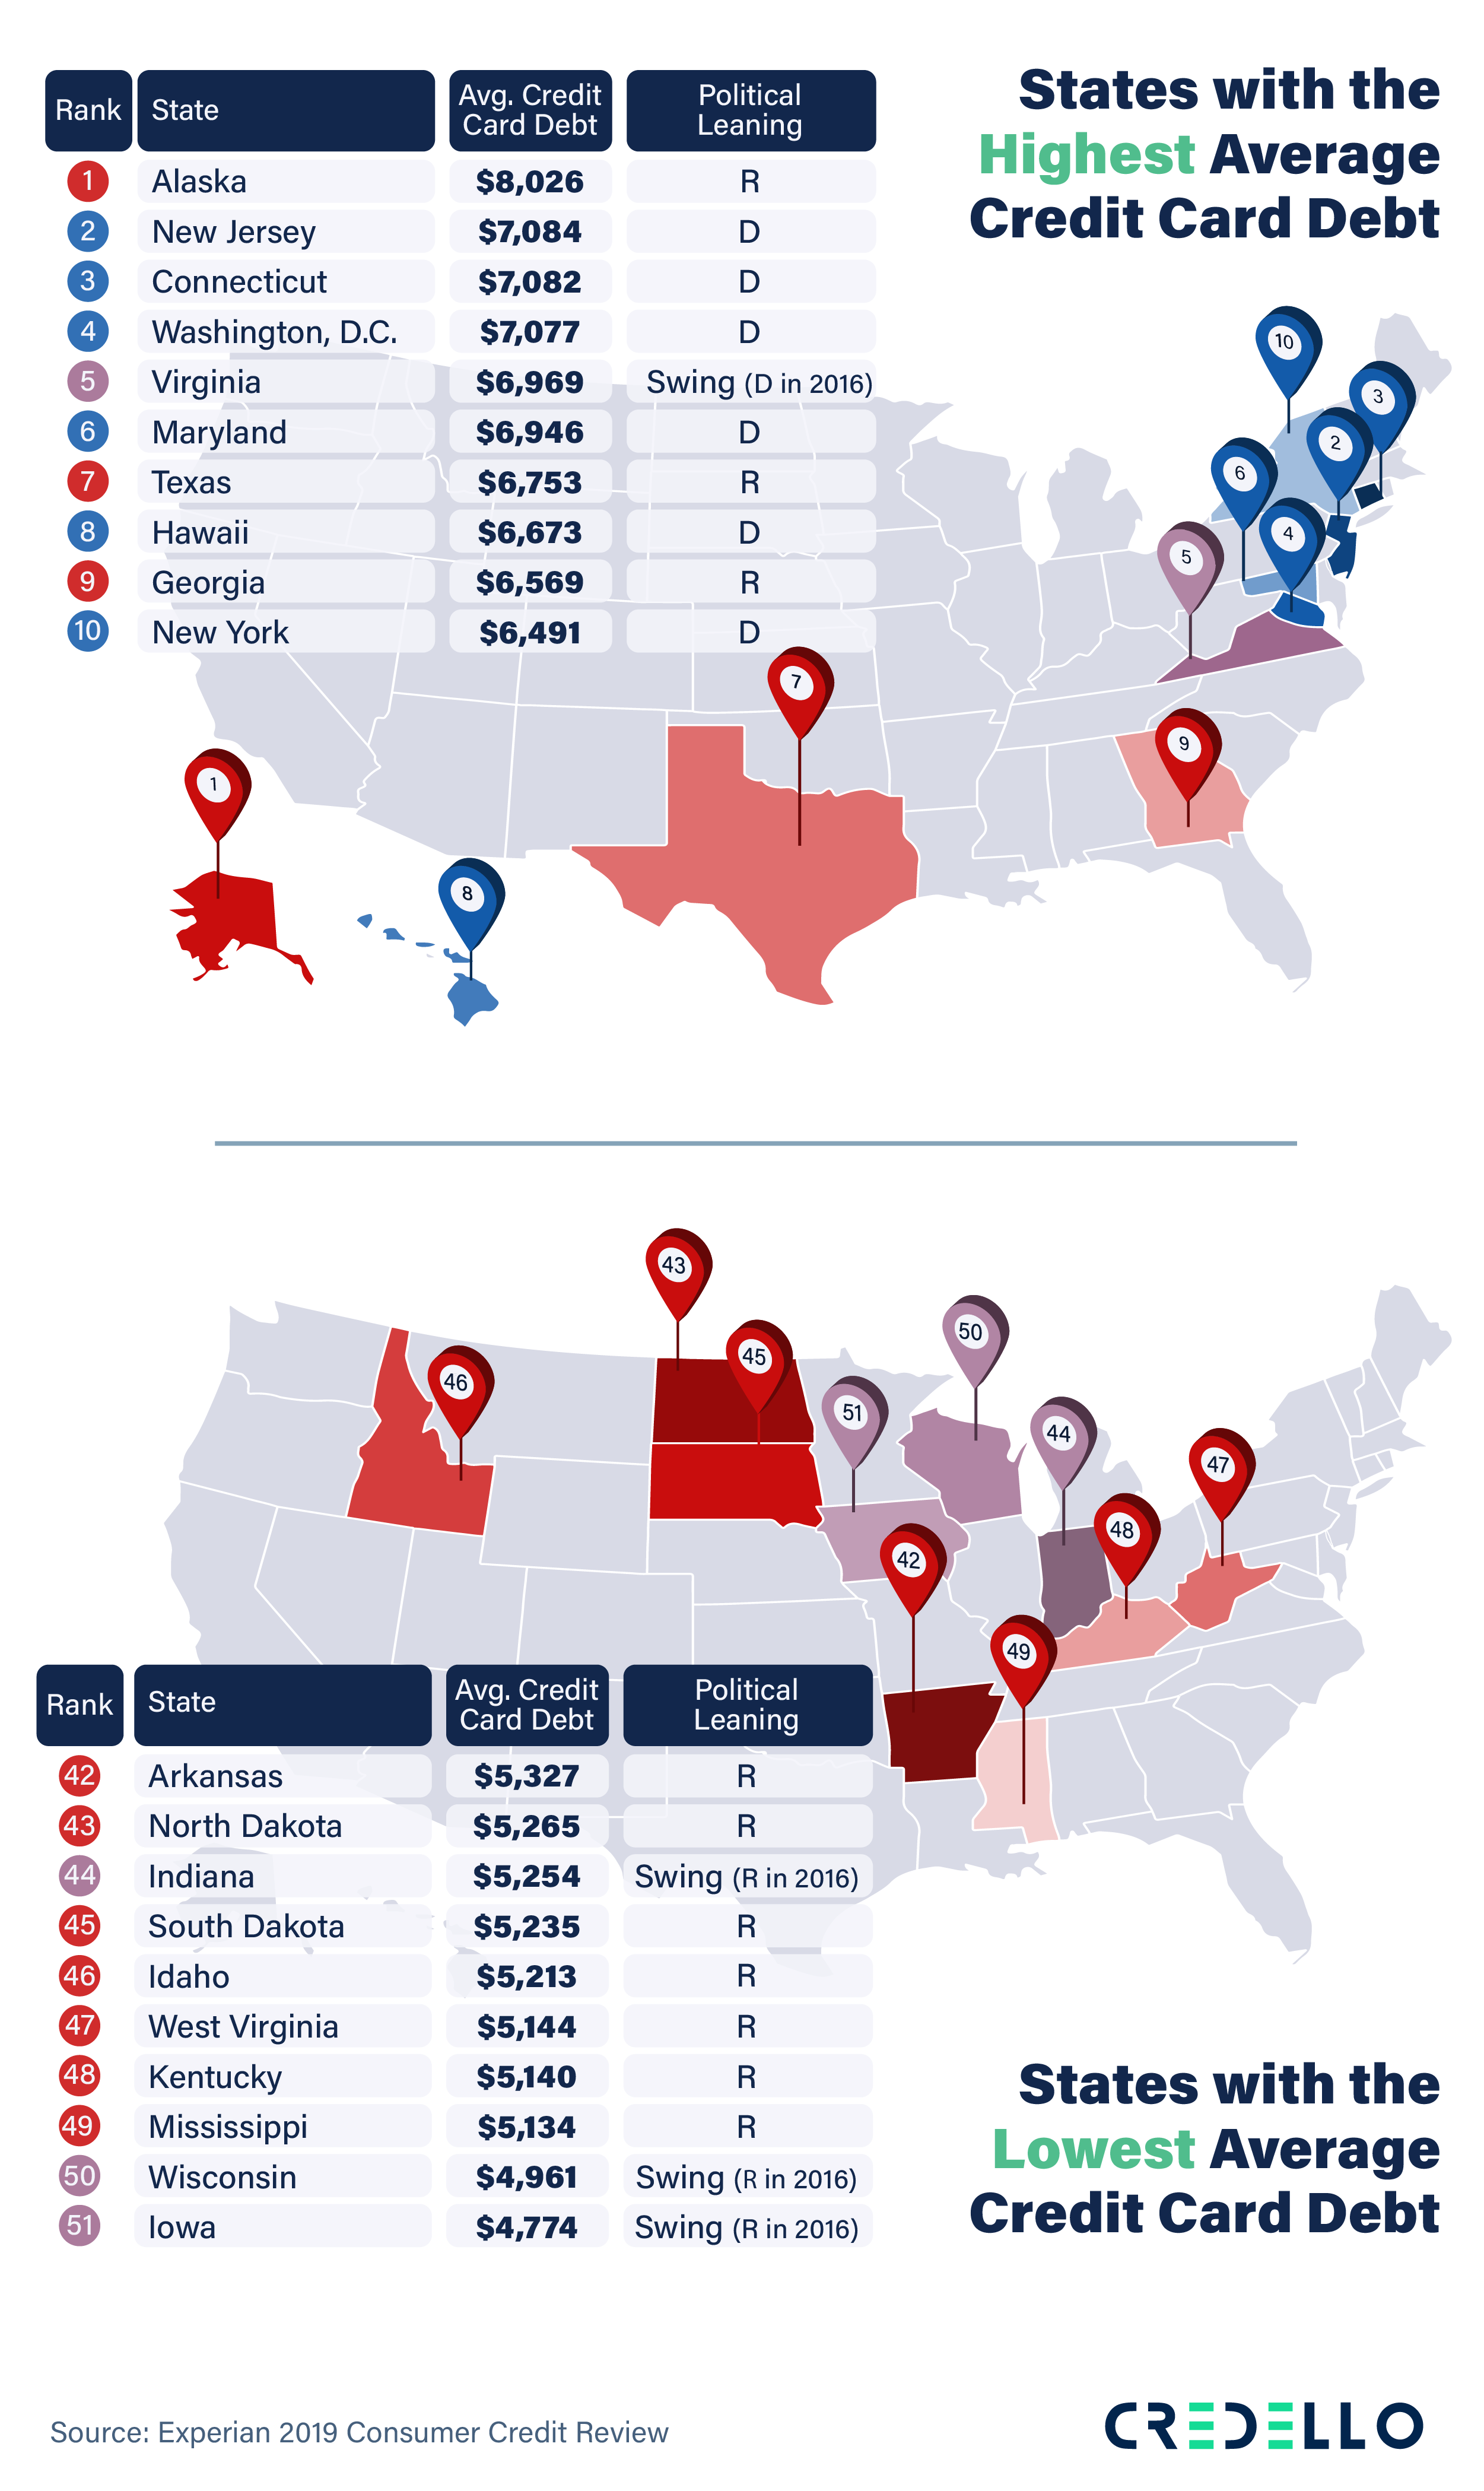 Take a look at the highest and lowest average credit card debt in the red and blue states